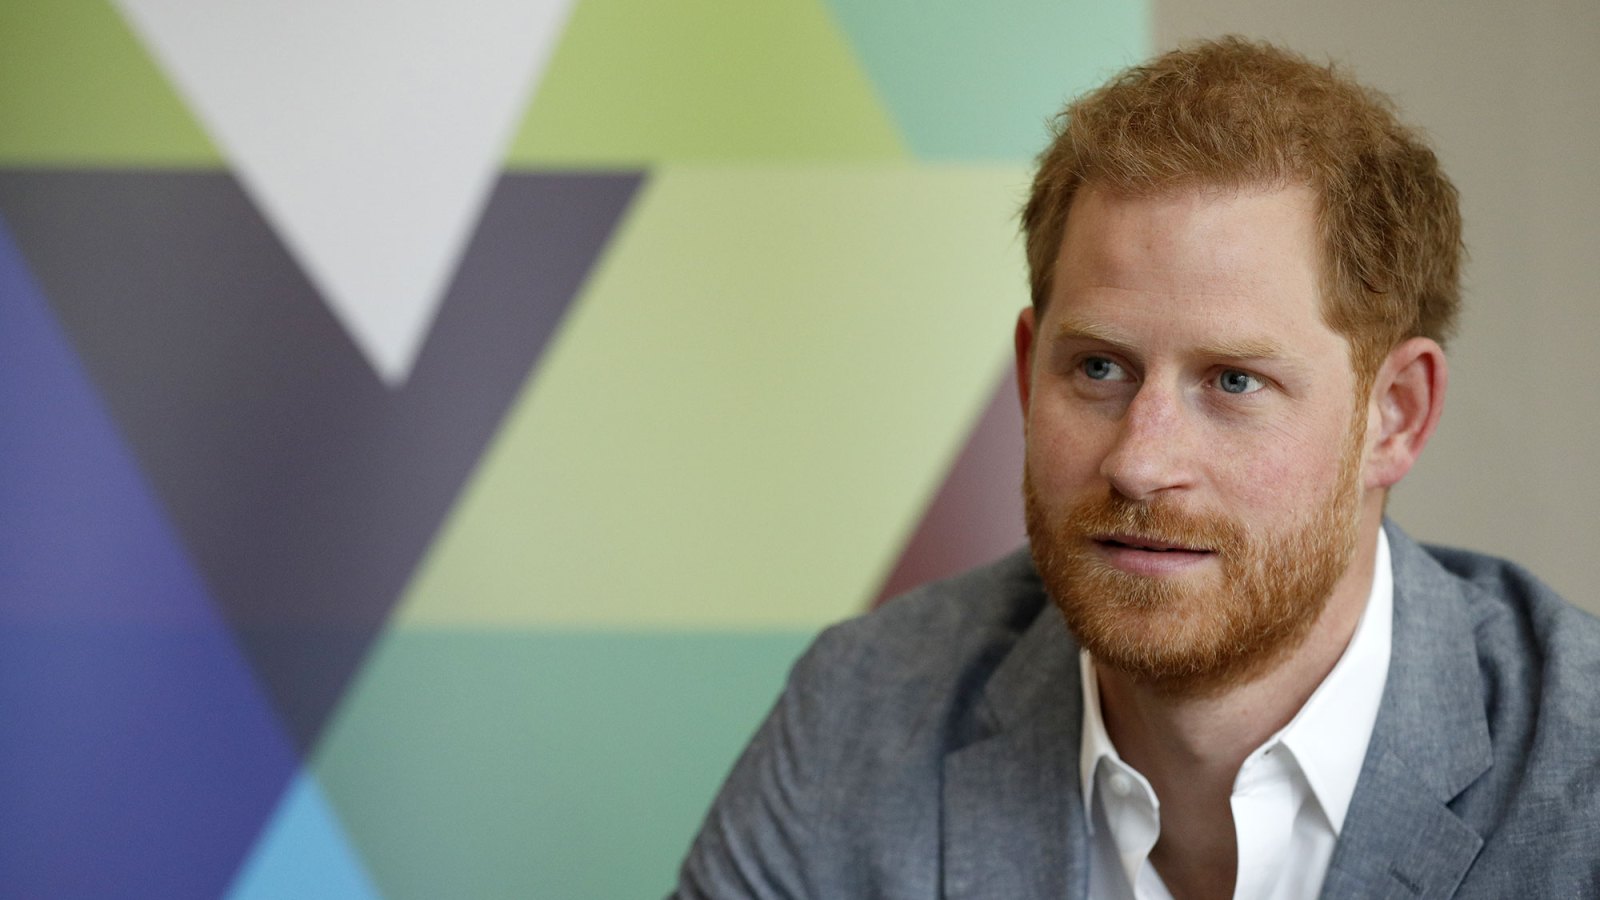 Prince Harry Warns Social Media Is ‘More Addictive Than Drugs and Alcohol’ Just One Day After He and Duchess Meghan Join Instagram